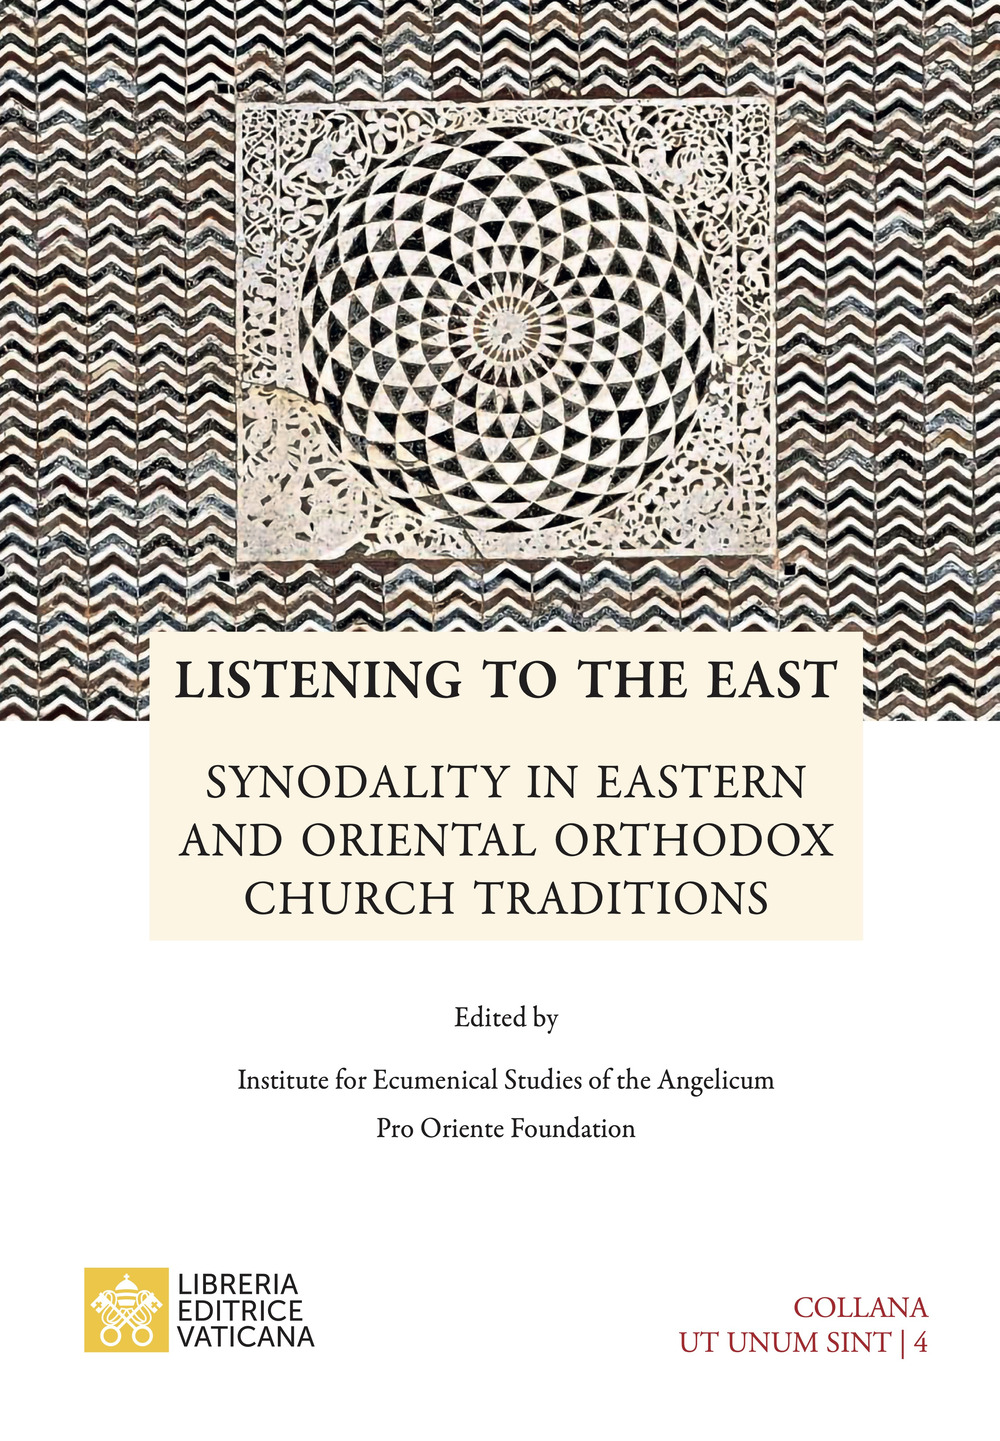 Listening to the east. Synodality in eastern and oriental orthodox church traditions